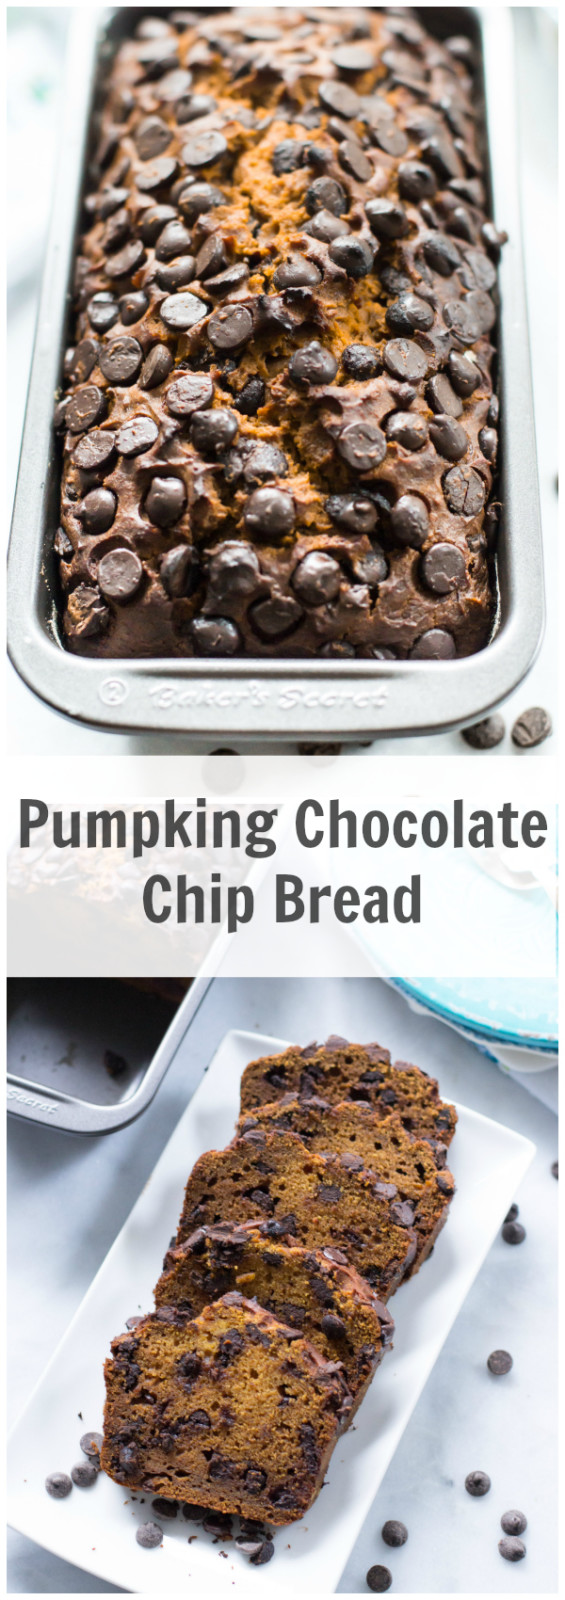 Pumpkin Chocolate Chip Bread - This is an incredibly moist Pumpkin Chocolate Chip Bread and it is loaded with fall flavour from the sweet cinnamon spice, cinnamon and chocolate chips. Enjoy this healthy pumpkin bread! 